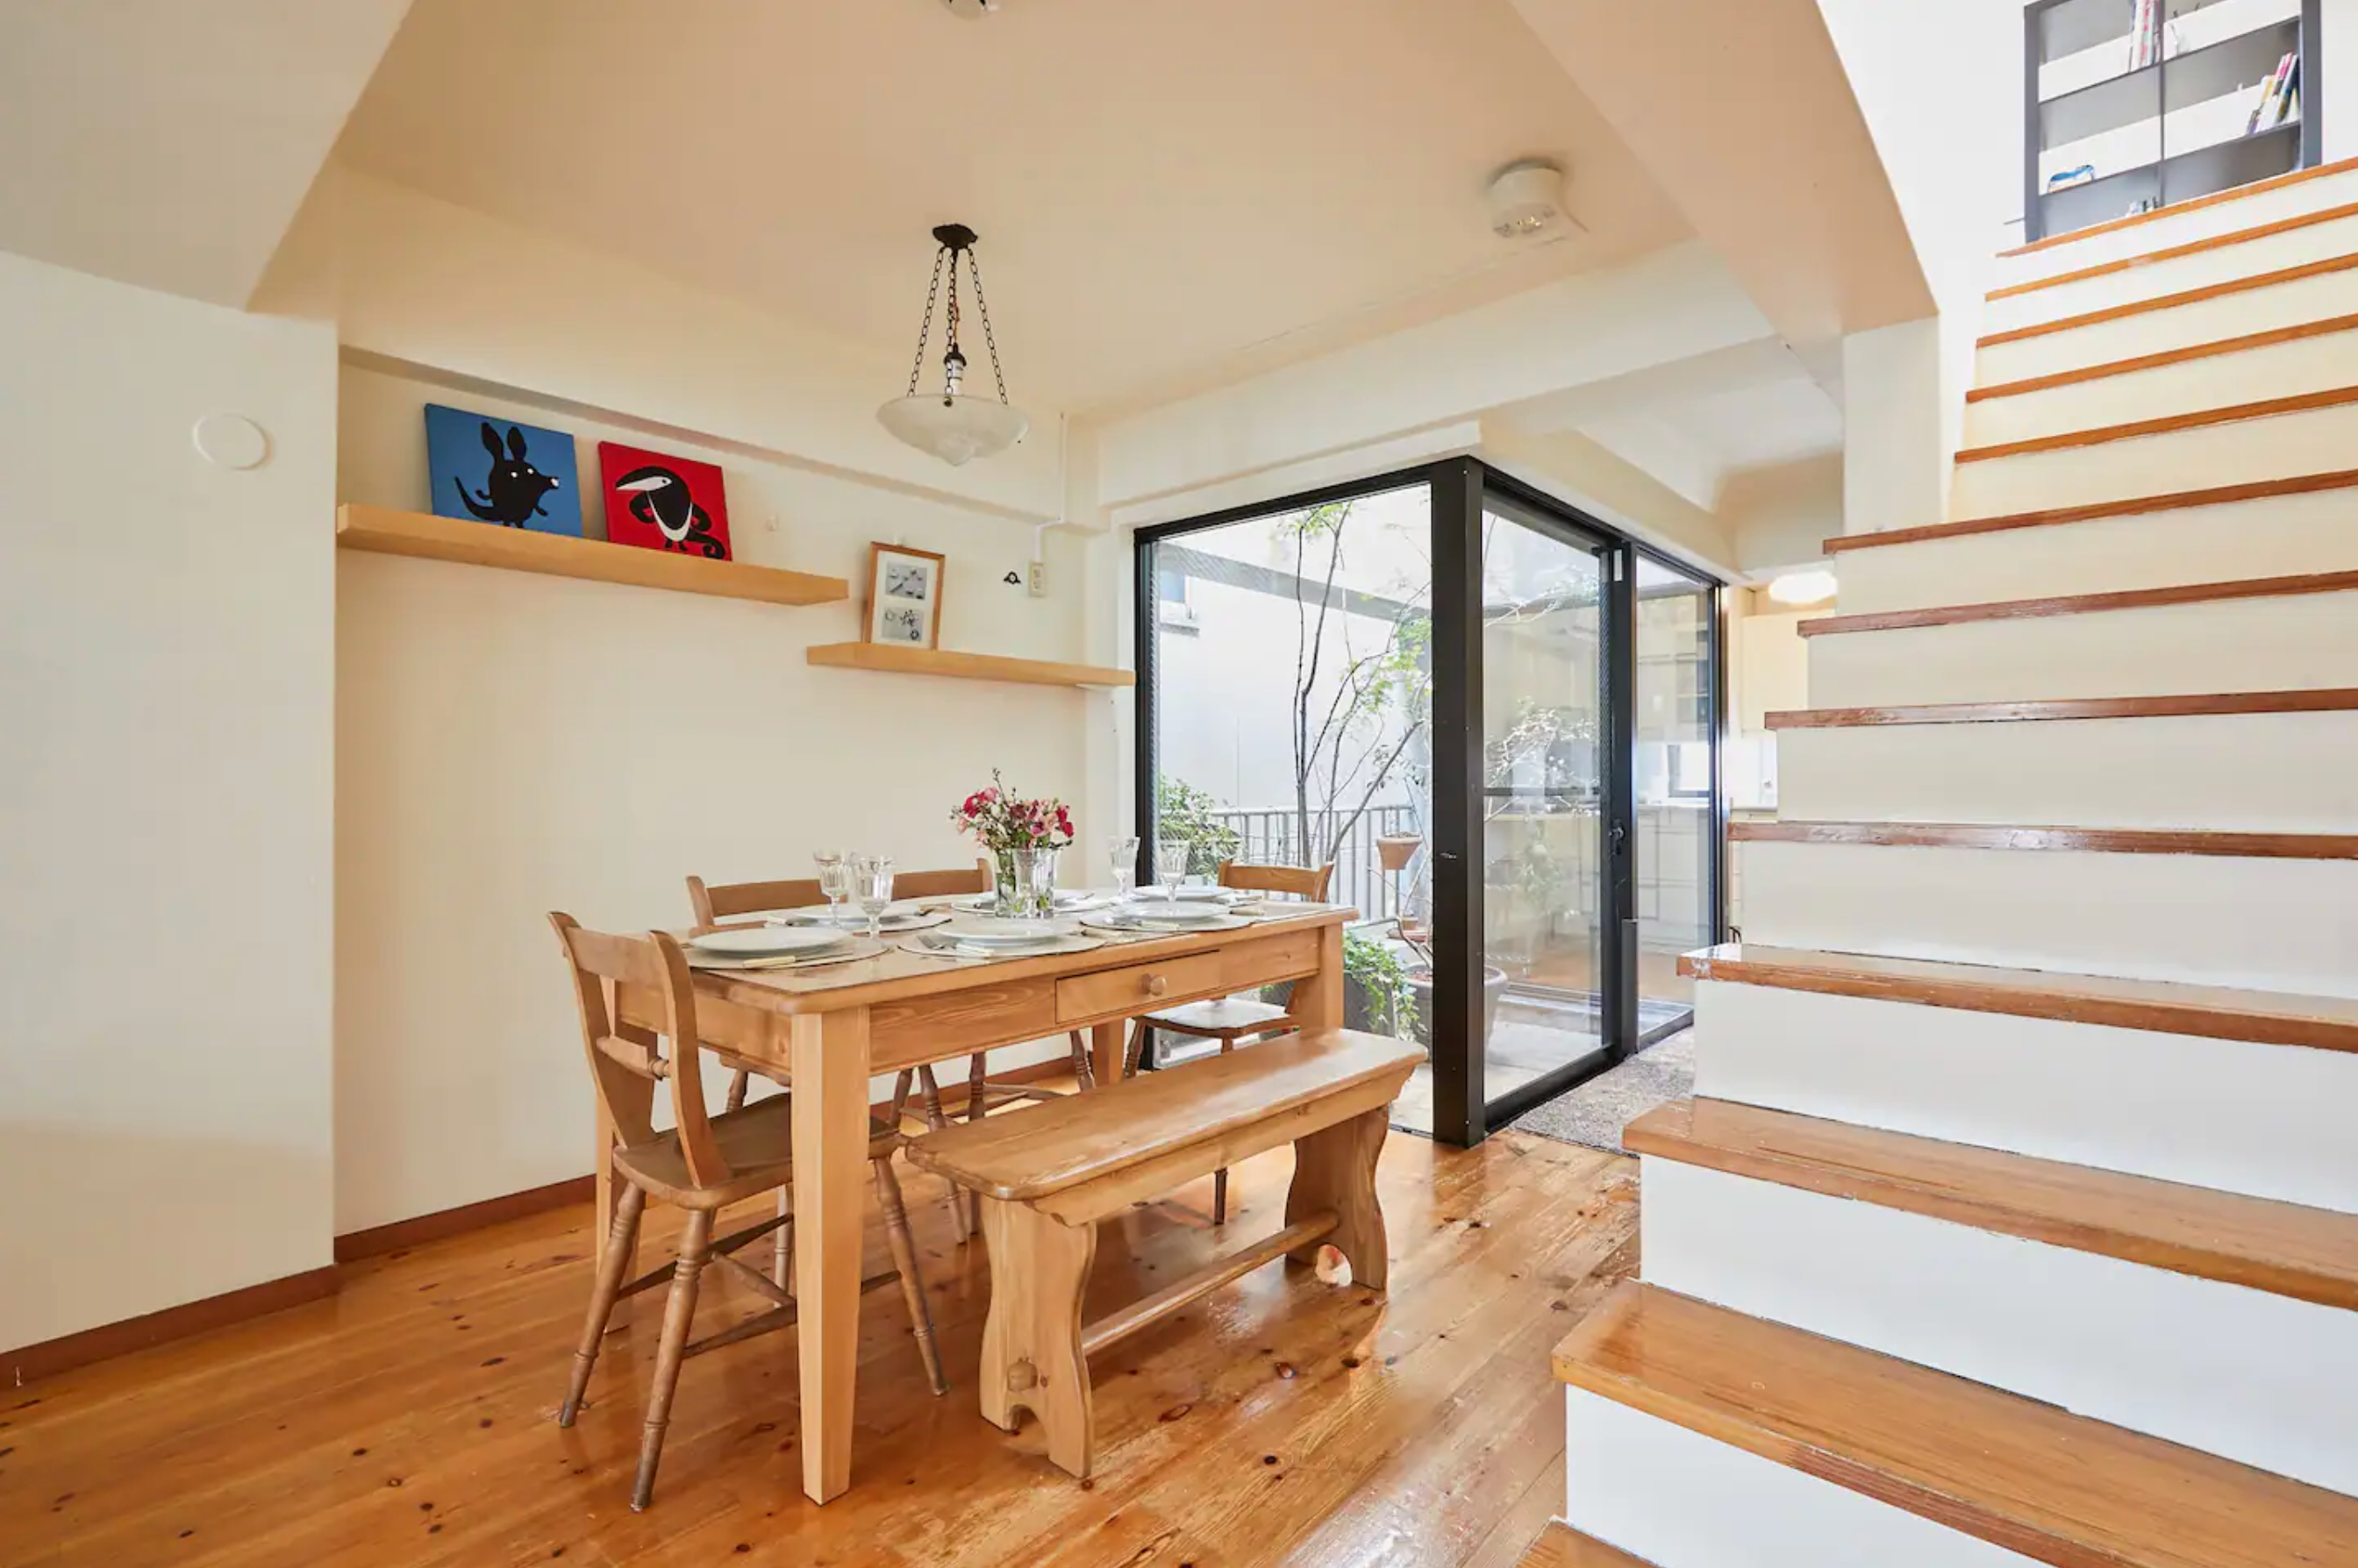 <p><strong>Bed & bath:</strong> 2 bedrooms, 1.5 baths<br> <strong>Top amenities:</strong> Mount Fuji views, high-speed Wi-Fi</p> <p>This airy two-bedroom in Shibuya is a remote worker’s dream. The host, Mitsuko, offers guests cooking classes and has a wealth of information on what to see and do in the area. The bathroom has convenient perks that guests will love, like a curling iron and bubble bath products. The kitchen features natural marble, cooking appliances, and a dining table that can accommodate up to six—and easily functions as a workspace, too. The living room TV comes preset with Netflix and Hulu, while upstairs, one of the two bedrooms offers views of Mount Fuji on a clear day.</p> <div class="callout"><p><a href="https://cna.st/affiliate-link/2uxxCQ7Rfr7UbY81Z3FnBafdqPBY3GRqSxsAHWCo9iGCvJNhBcsSWhndBYcBwkCxW5zrkGs5xG3hx5qJXnBSnKboytWjAHhoDw16eoouRURyMsMhWafNLpb87f1VT1VP6SFrQVY3a" rel="sponsored" title="Book now at Airbnb">Book now at Airbnb</a></p> </div><p>Sign up to receive the latest news, expert tips, and inspiration on all things travel</p><a href="https://www.cntraveler.com/newsletter/the-daily?sourceCode=msnsend">Inspire Me</a>